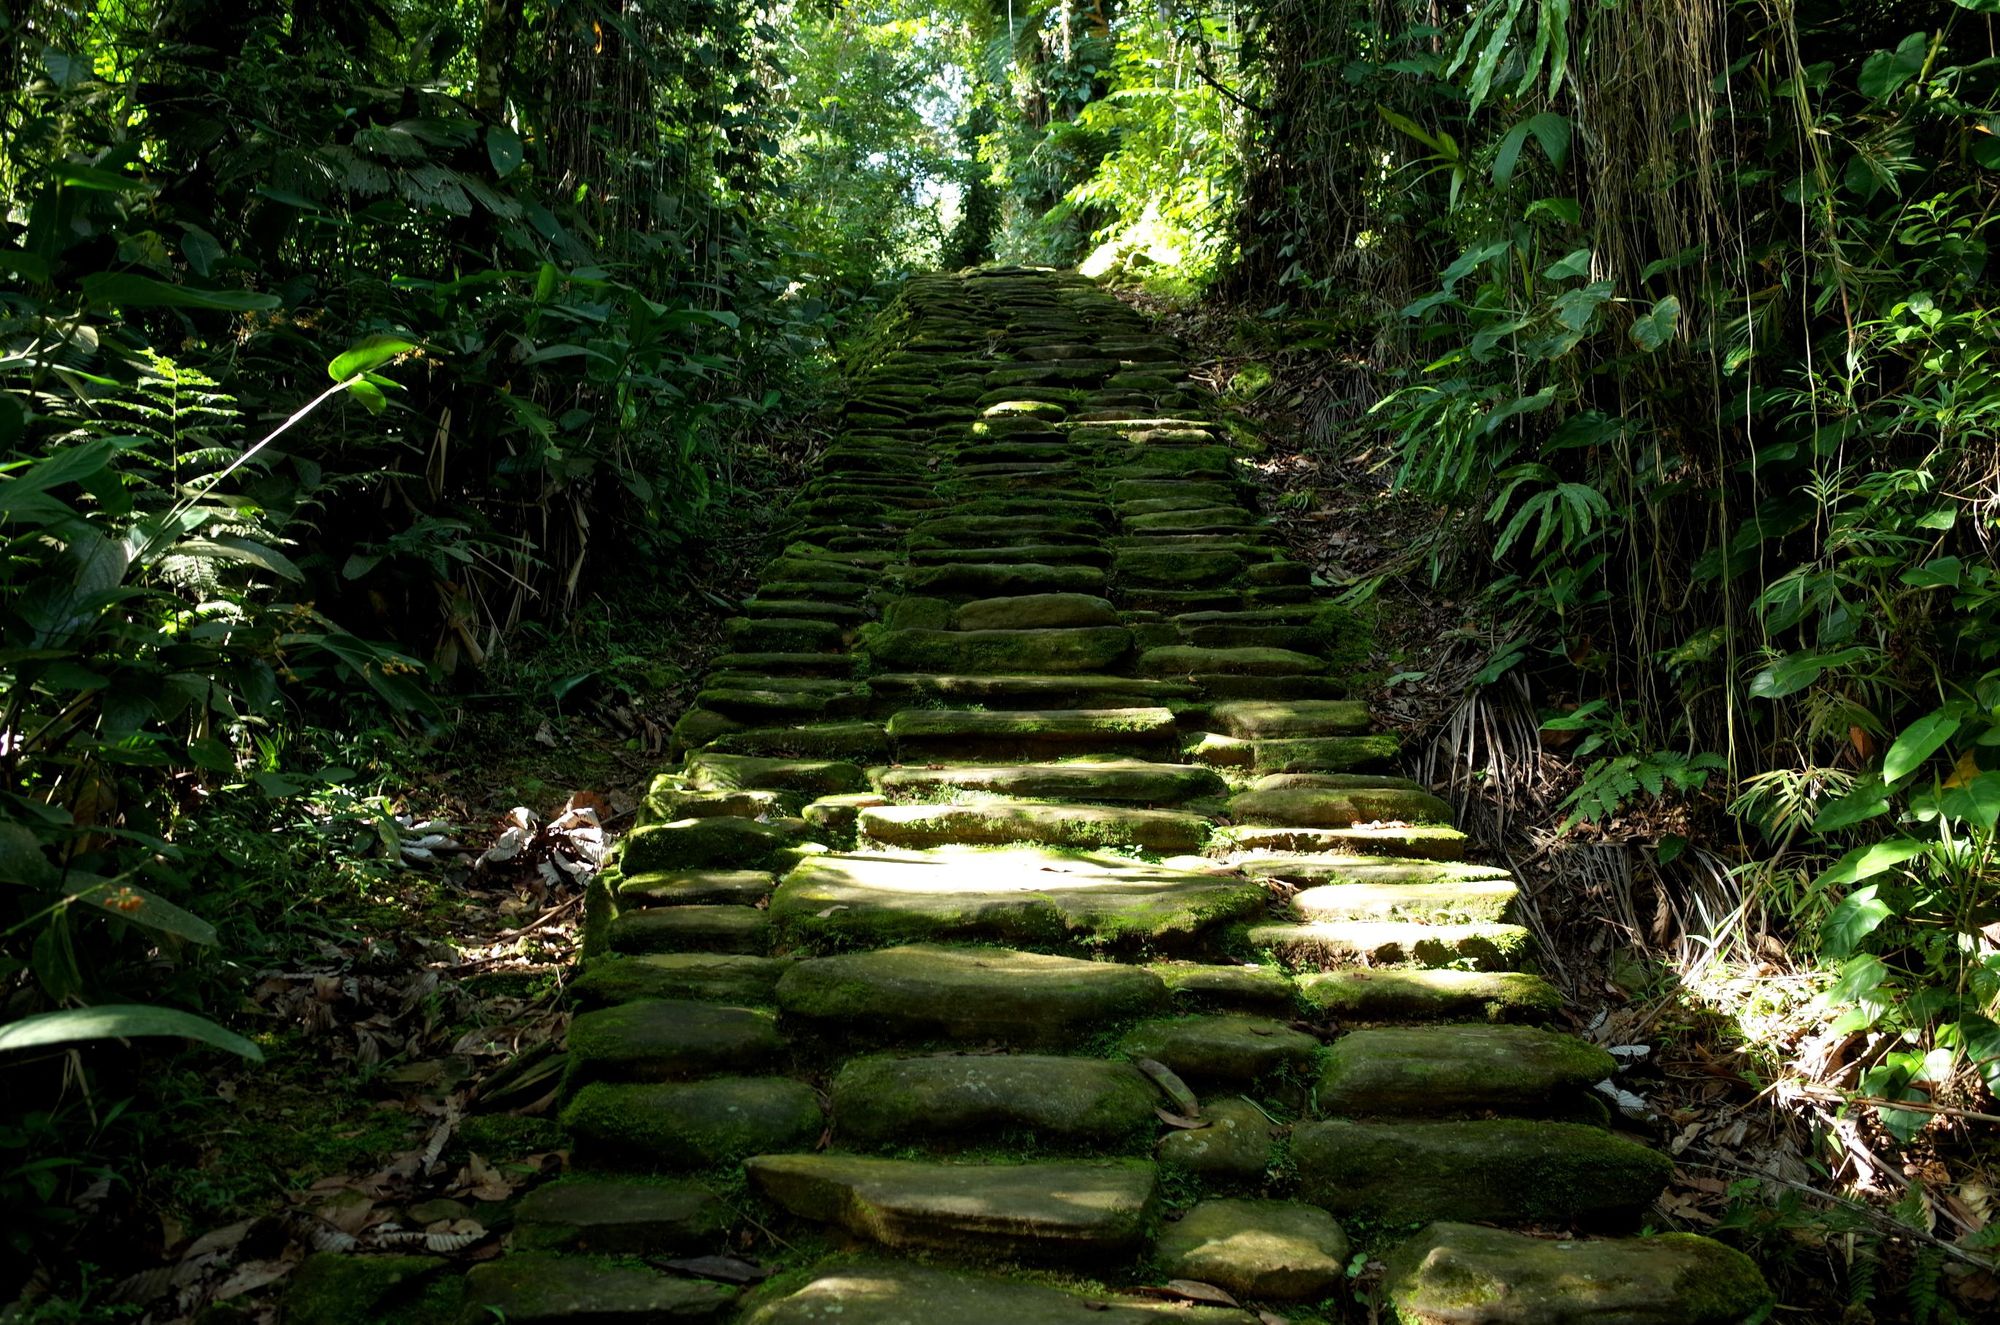 The staircase straightens out as it approaches Ciudad Perdida. Photo: Getty